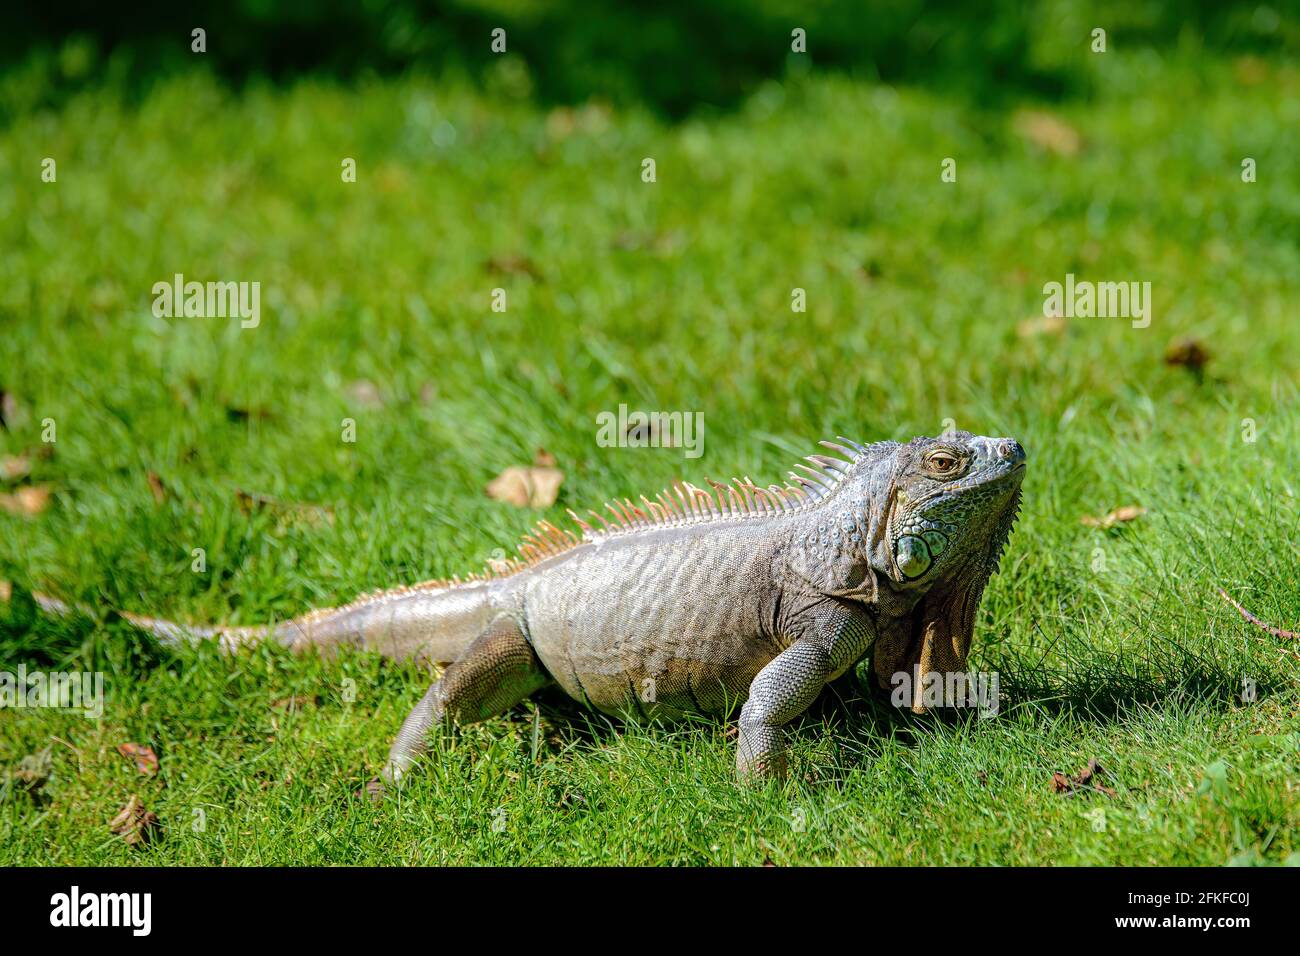 An iguana standing in green grass on a sunny day. He is looking up towards the sky. Grass is neatly mowed. Stock Photo